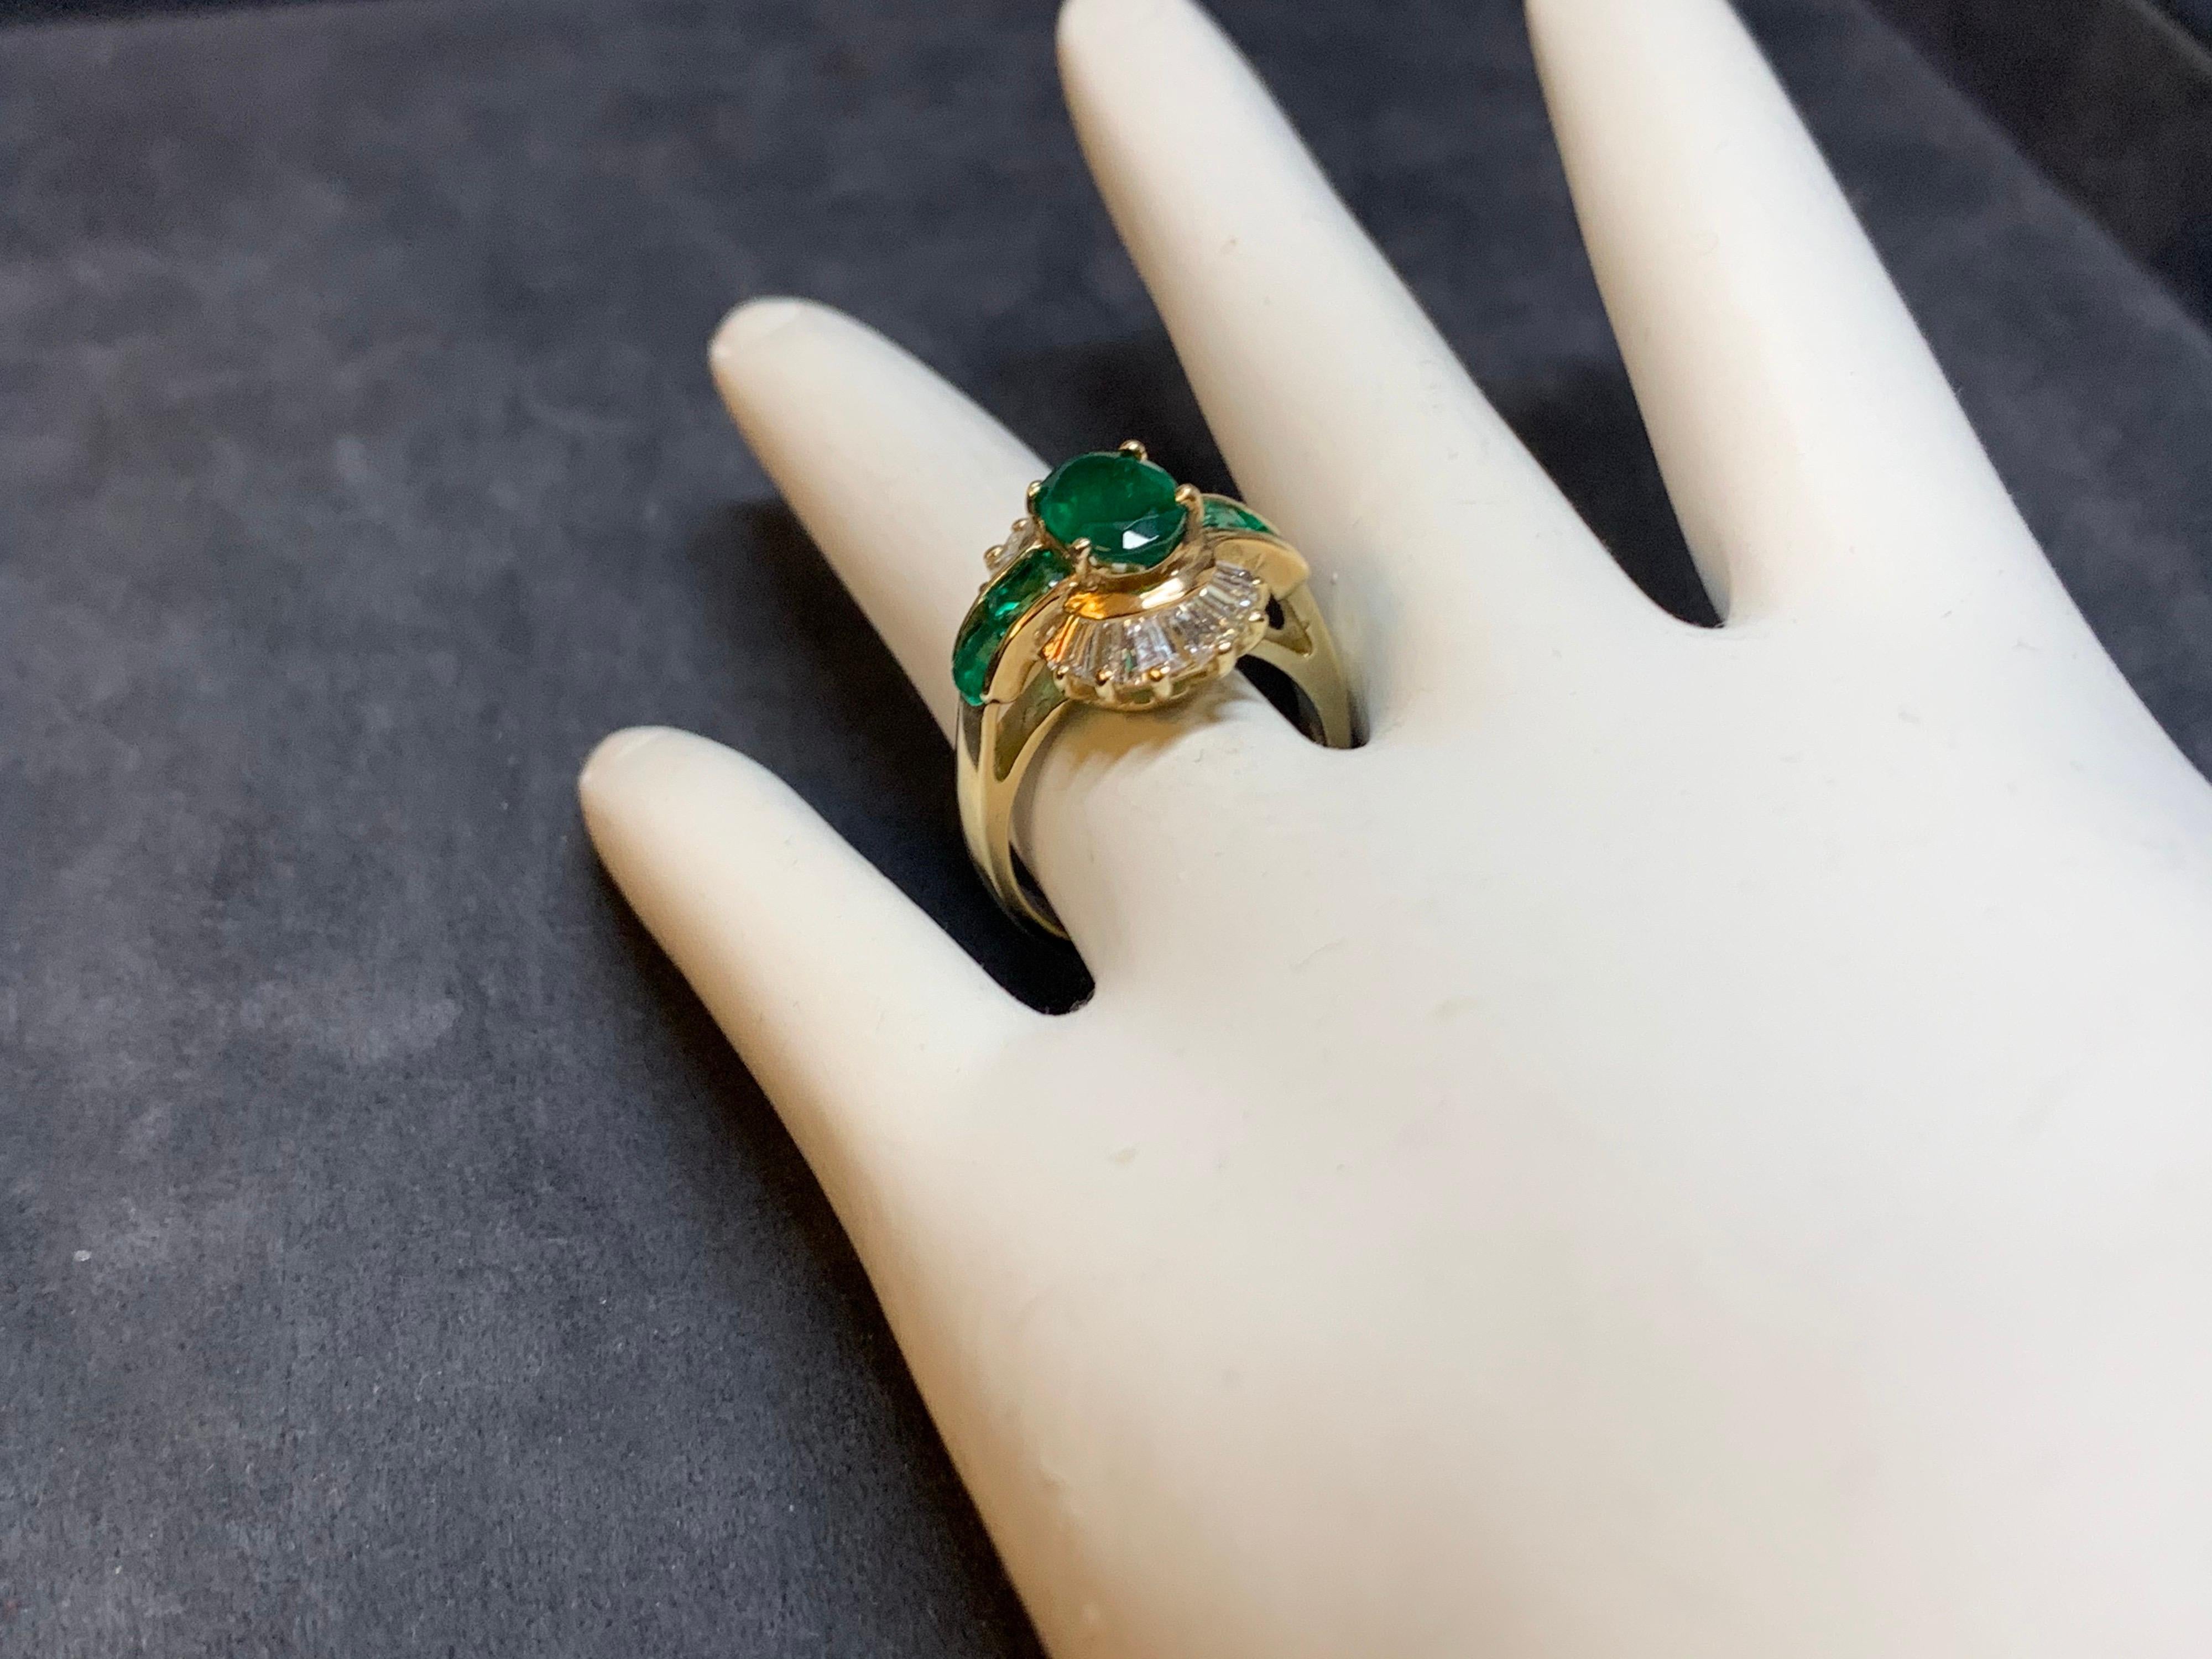 Retro Gold Cocktail Ring 3.1 Carat Natural Emerald Gemstone & Diamond circa 1950 In Good Condition For Sale In Los Angeles, CA